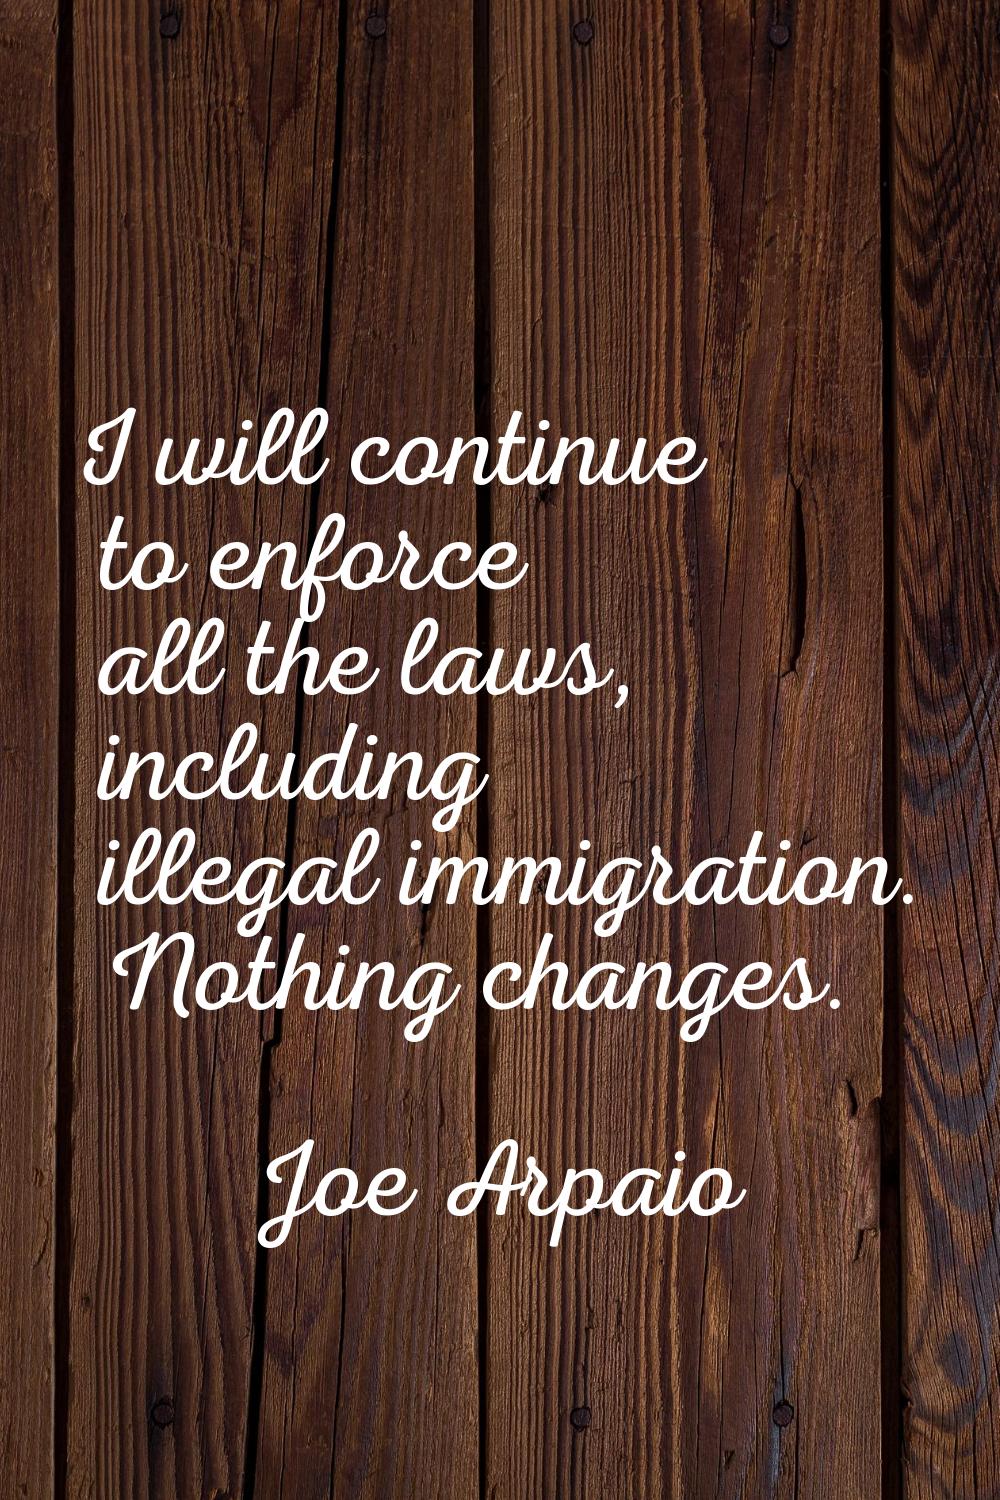 I will continue to enforce all the laws, including illegal immigration. Nothing changes.